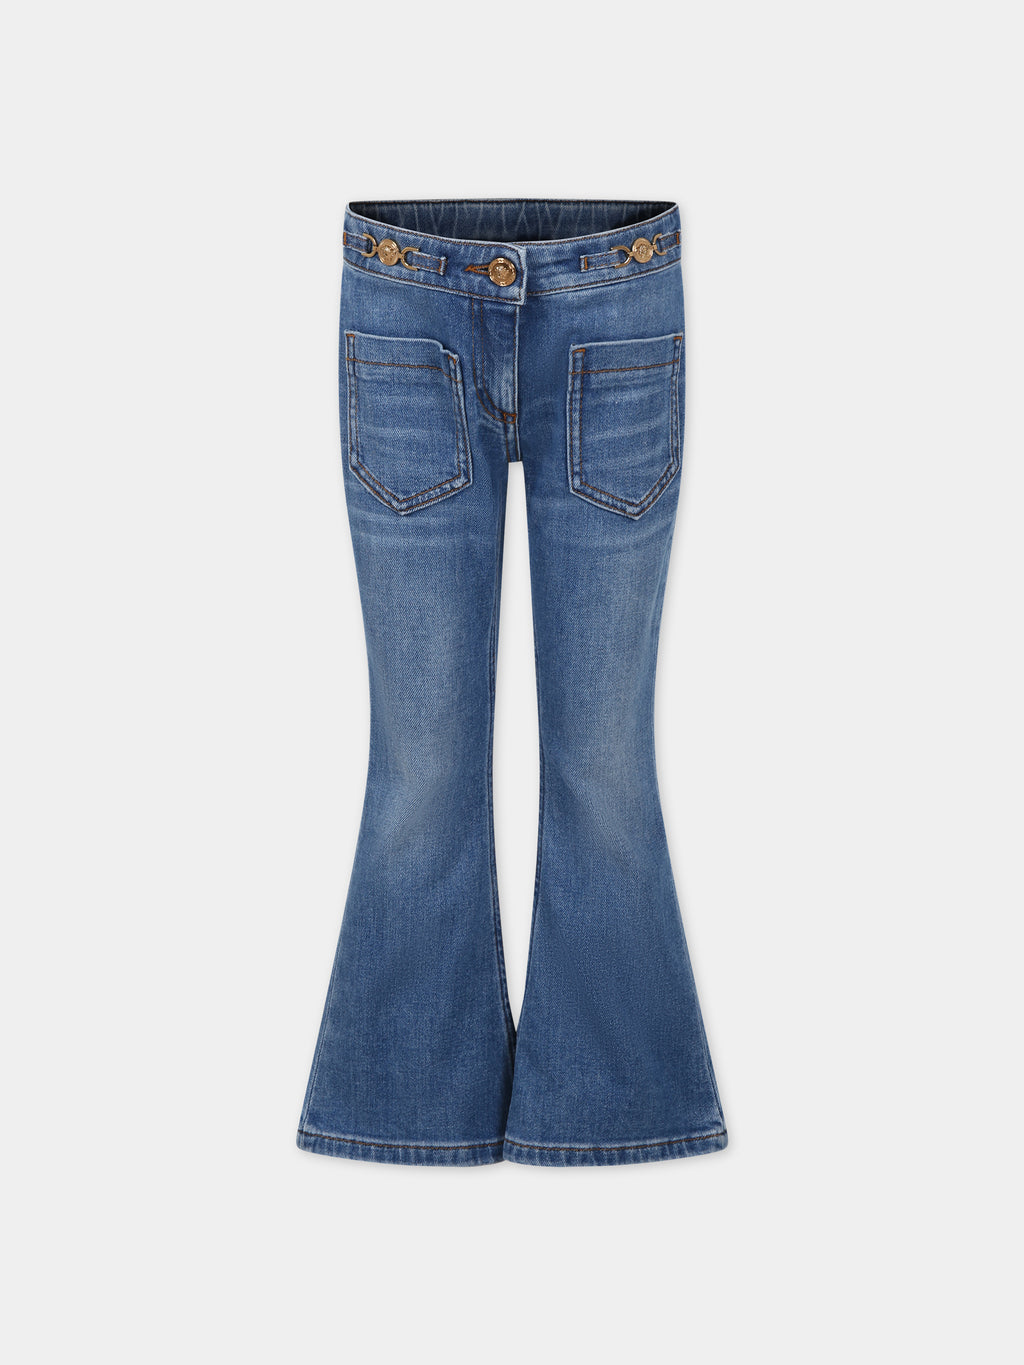 Jeans for girl with golden inserts